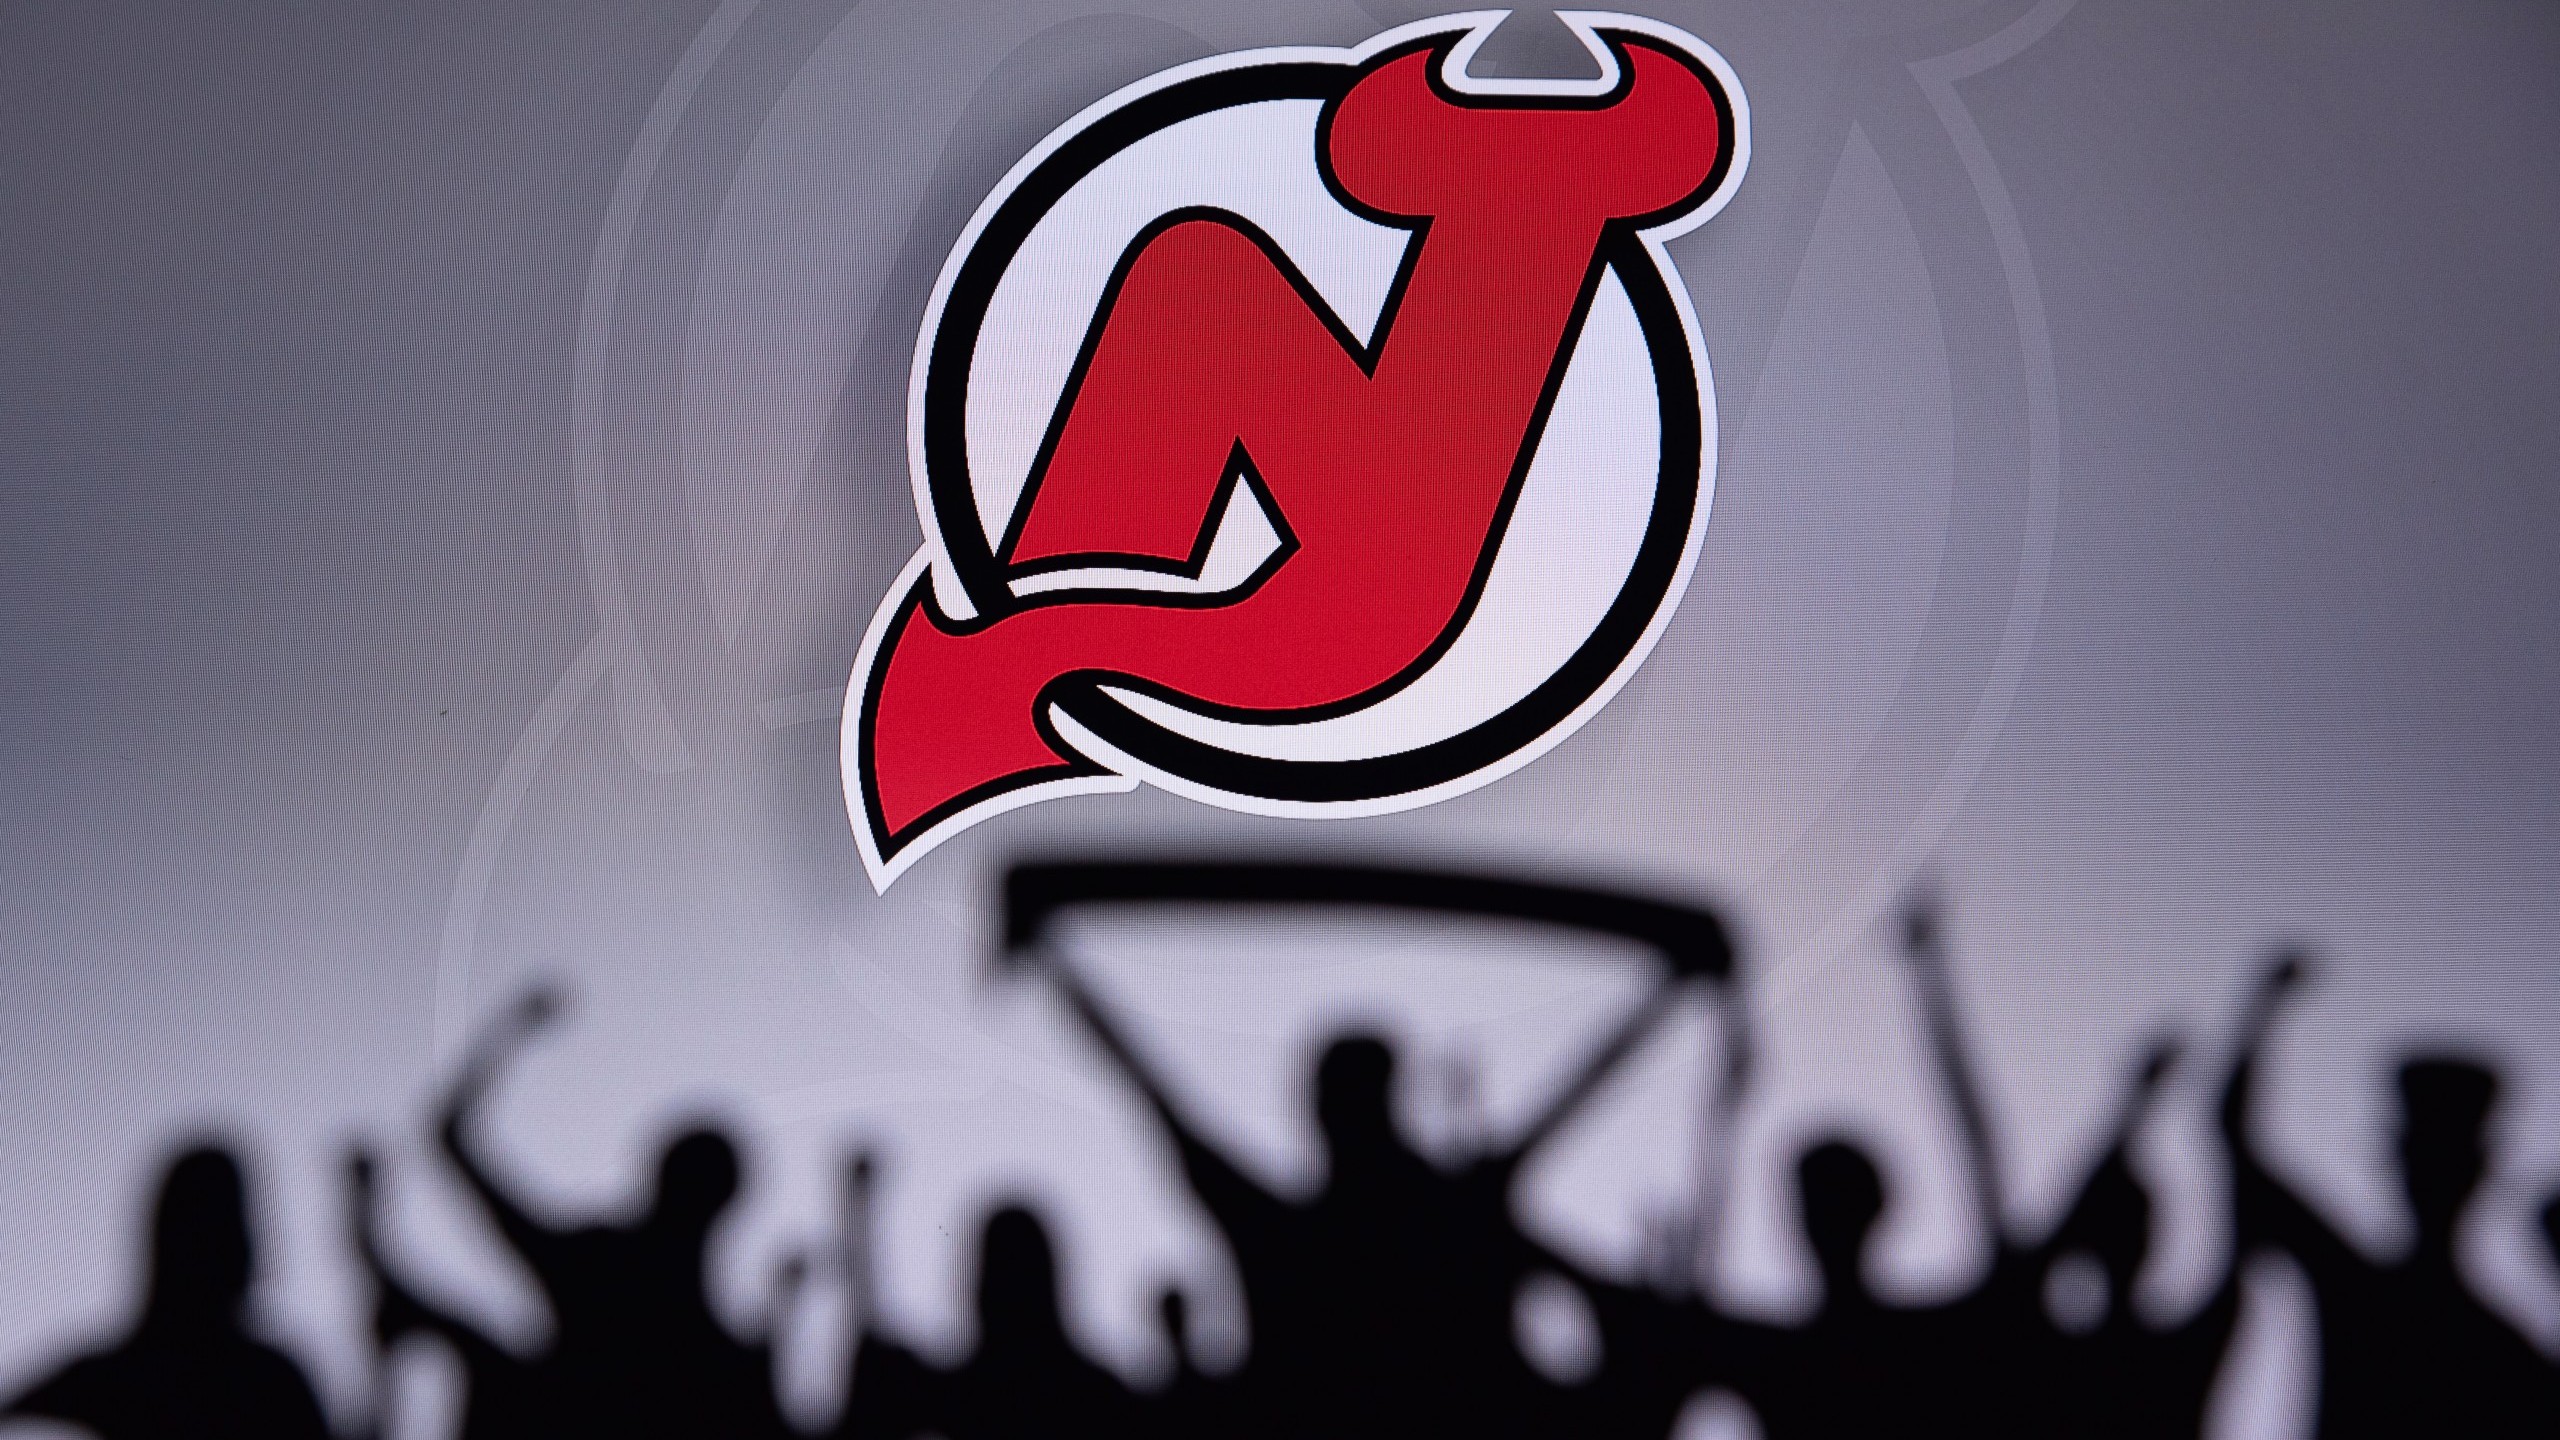 Breakdown of the 2021-22 New Jersey Devils Schedule - All About The Jersey